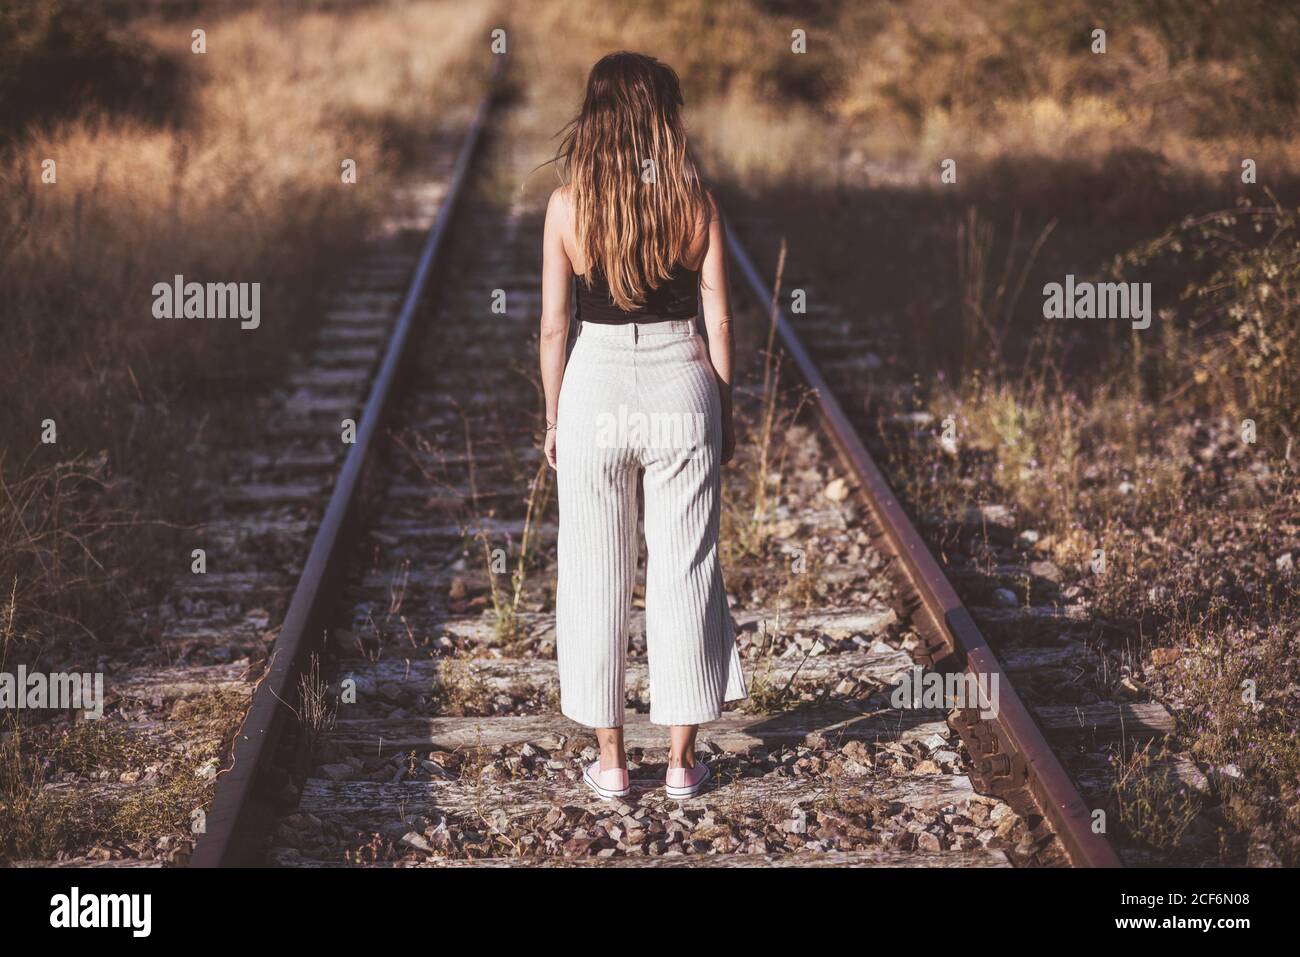 Back view of stylish Woman with long hair standing on railway ties through field of dry vegetation Stock Photo